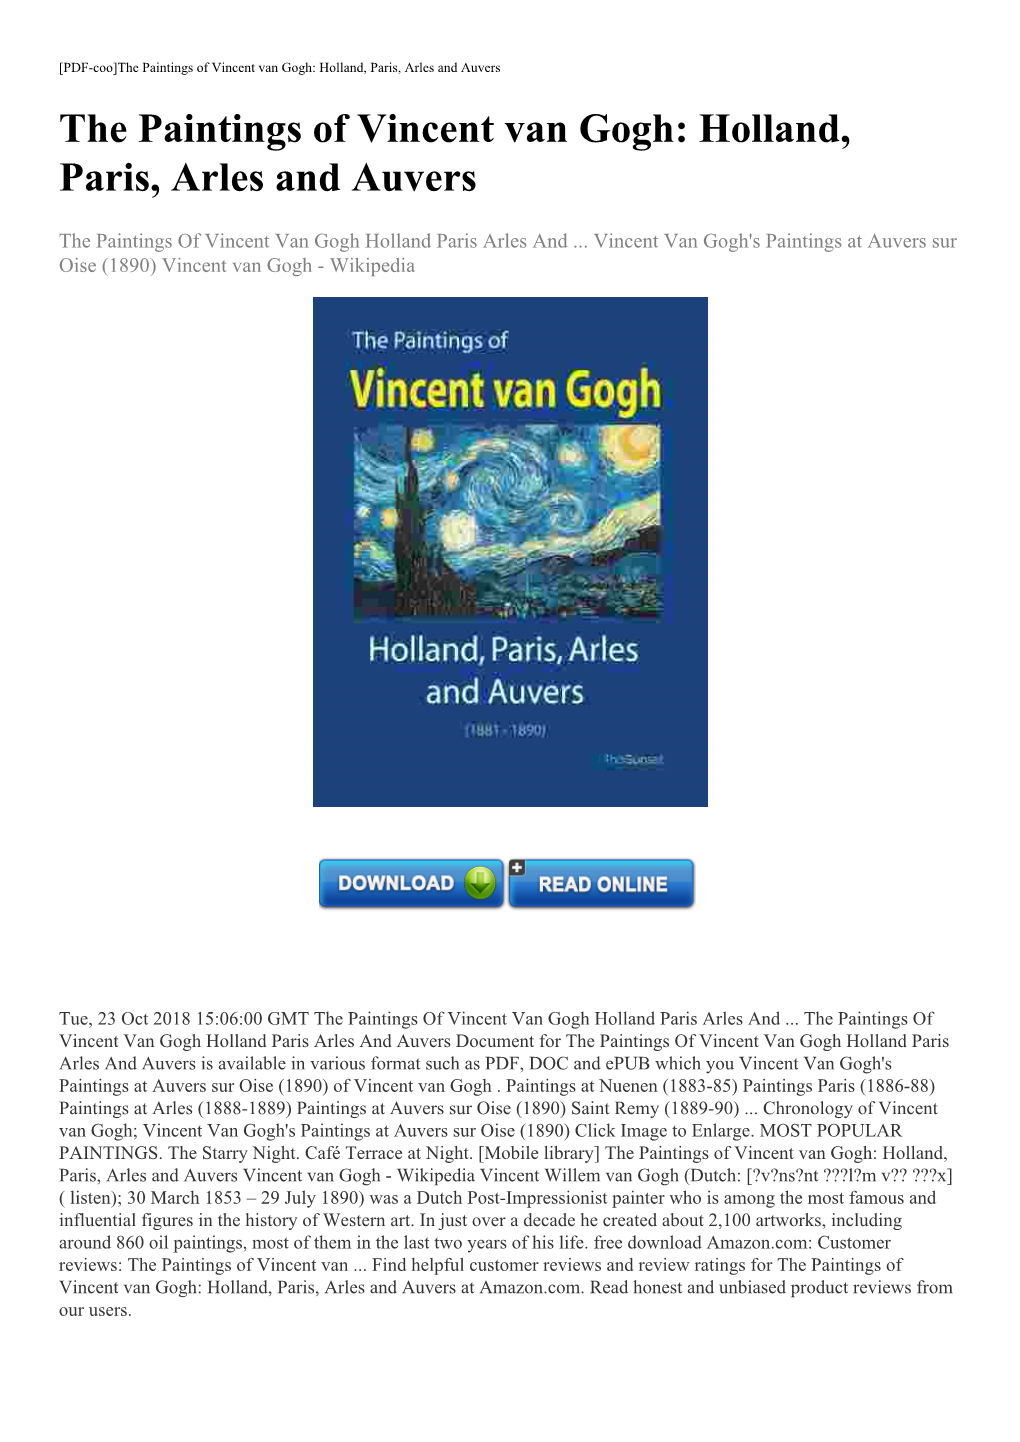 The Paintings of Vincent Van Gogh: Holland, Paris, Arles and Auvers the Paintings of Vincent Van Gogh: Holland, Paris, Arles and Auvers